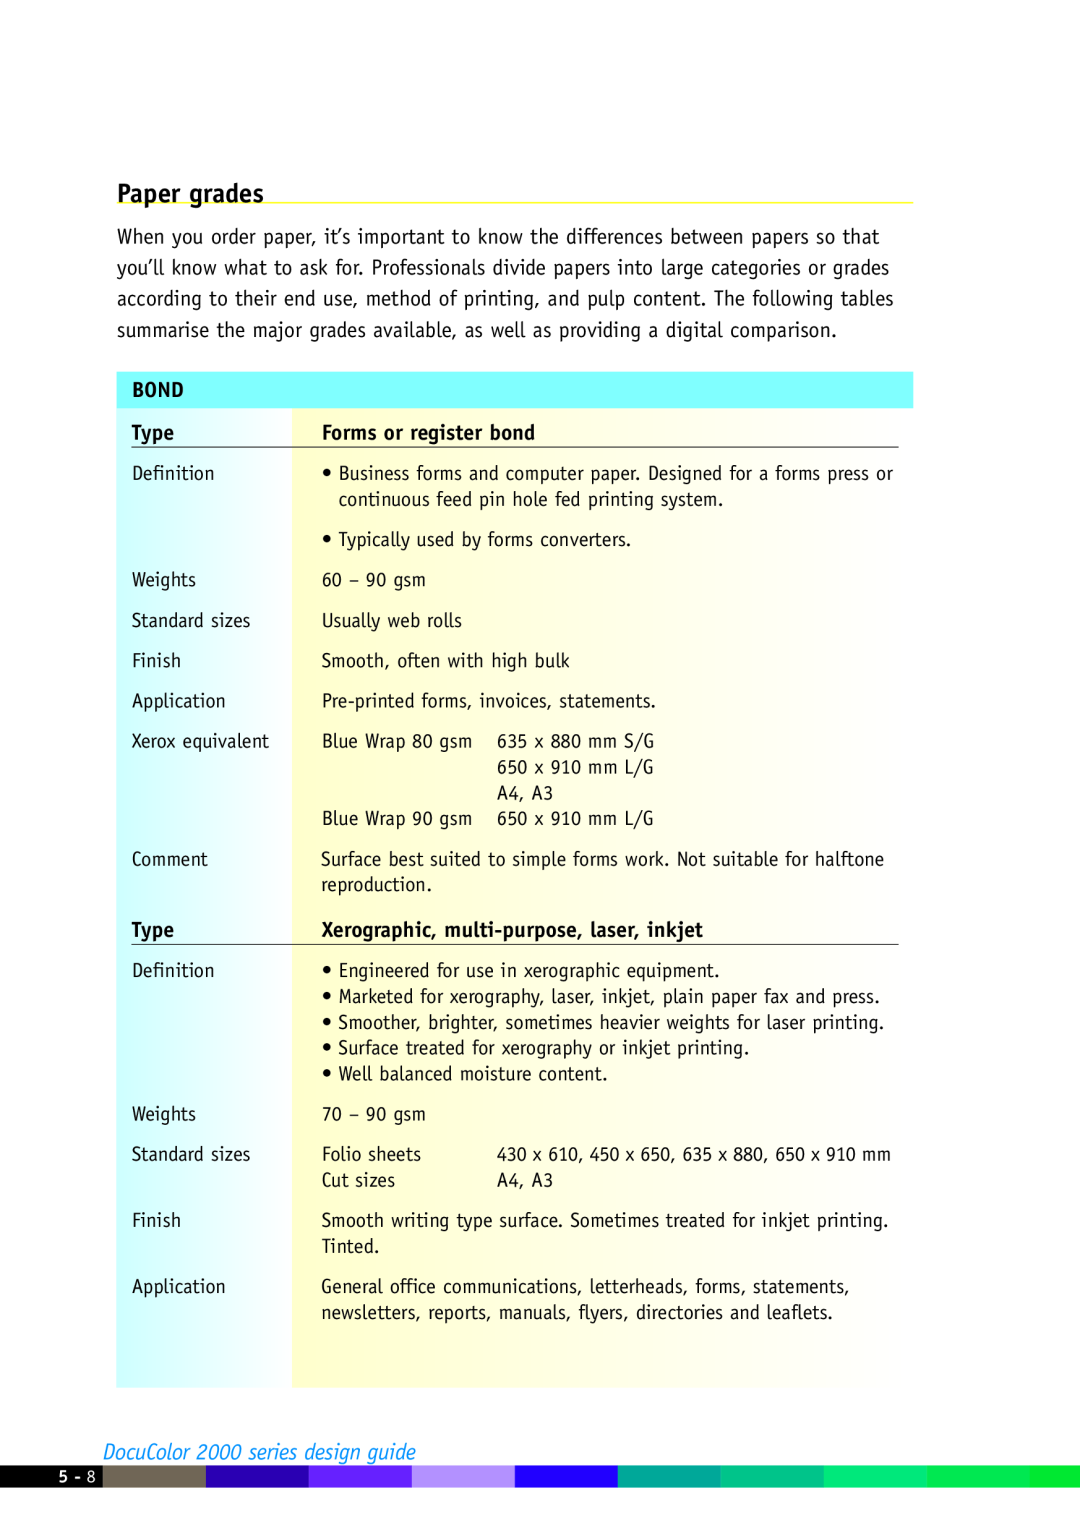 Xerox manual Paper grades, DocuColor 2000 series design guide, Bond, Type, Forms or register bond 